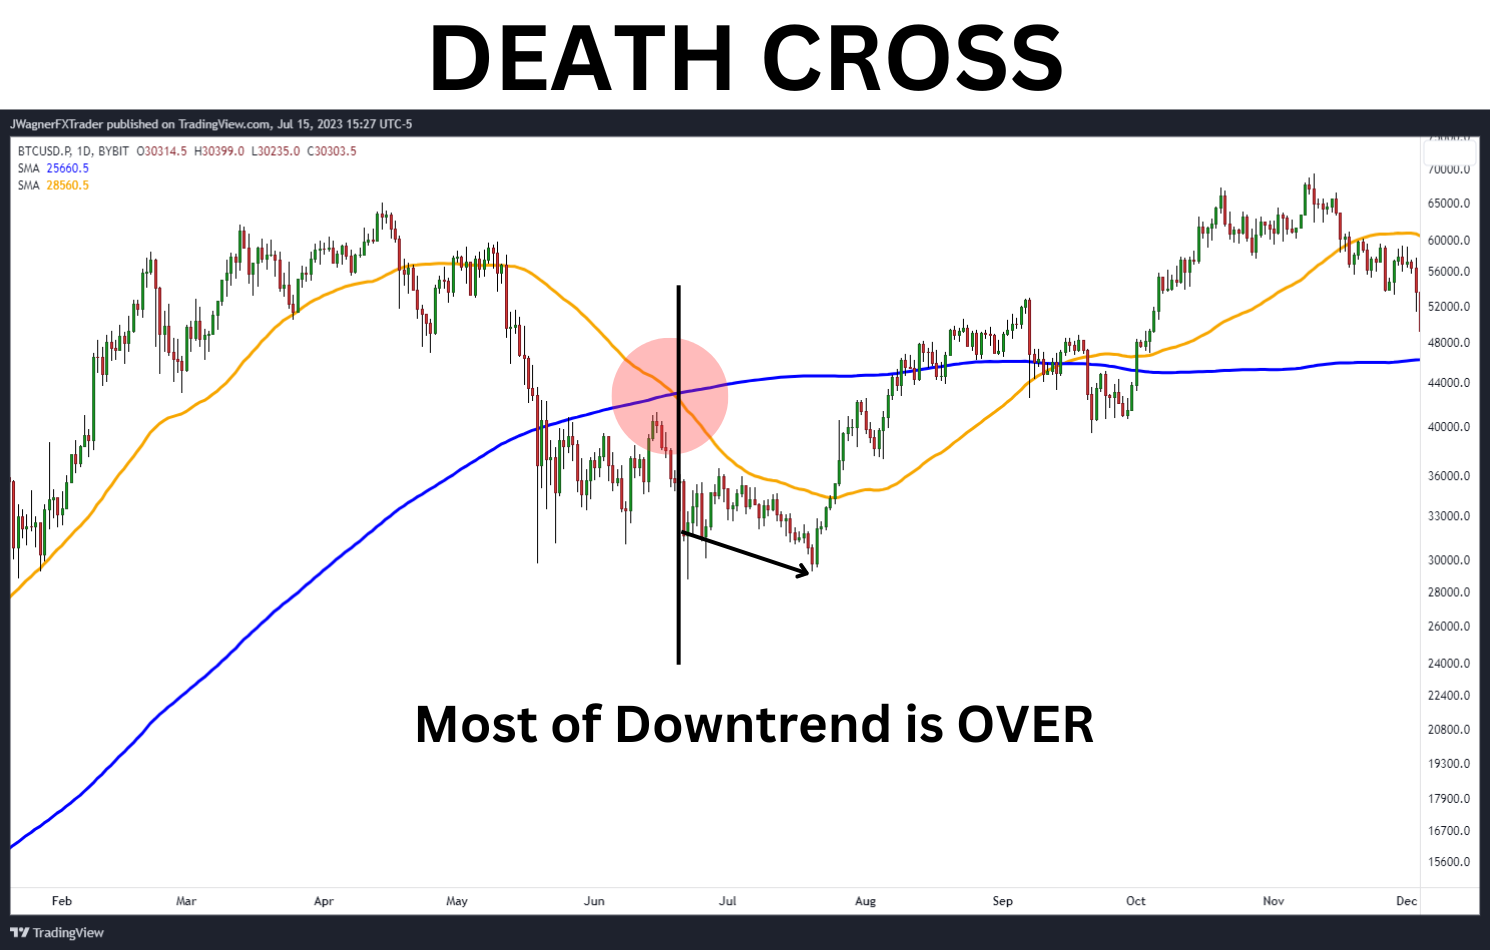 Simple moving average lagging as death cross.